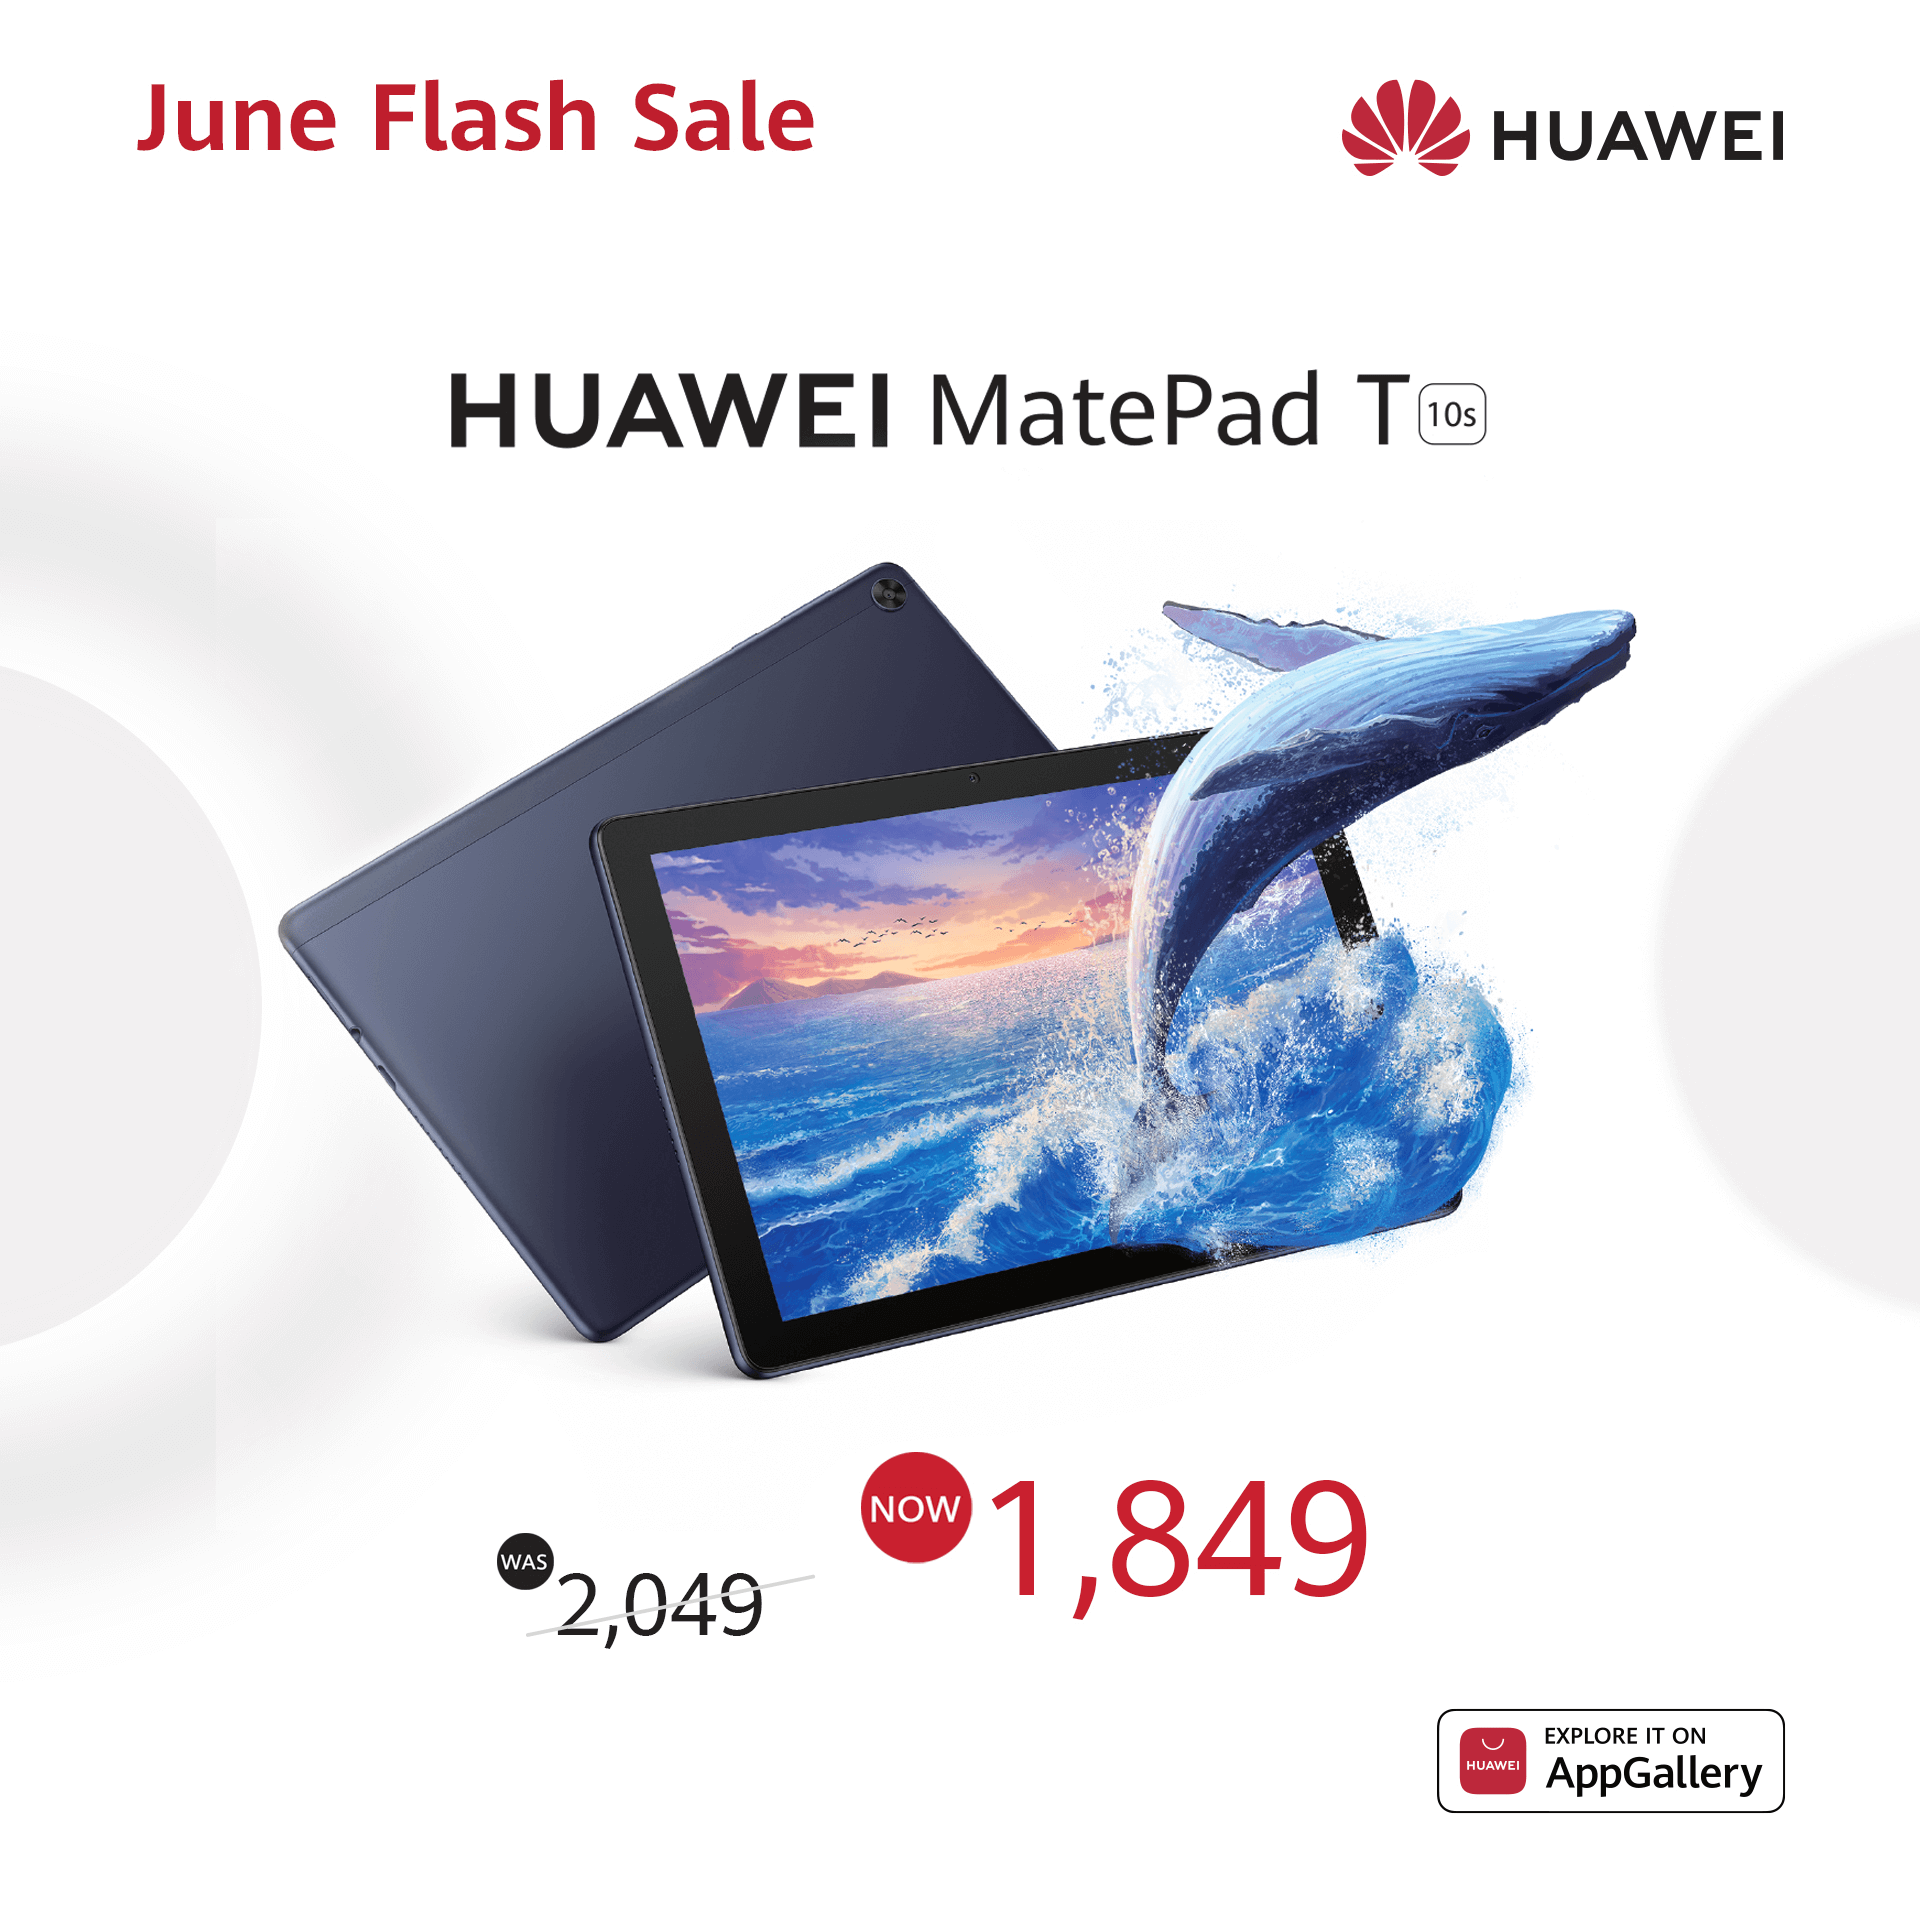 Get the Best Deals and Offers with Huawei this June!